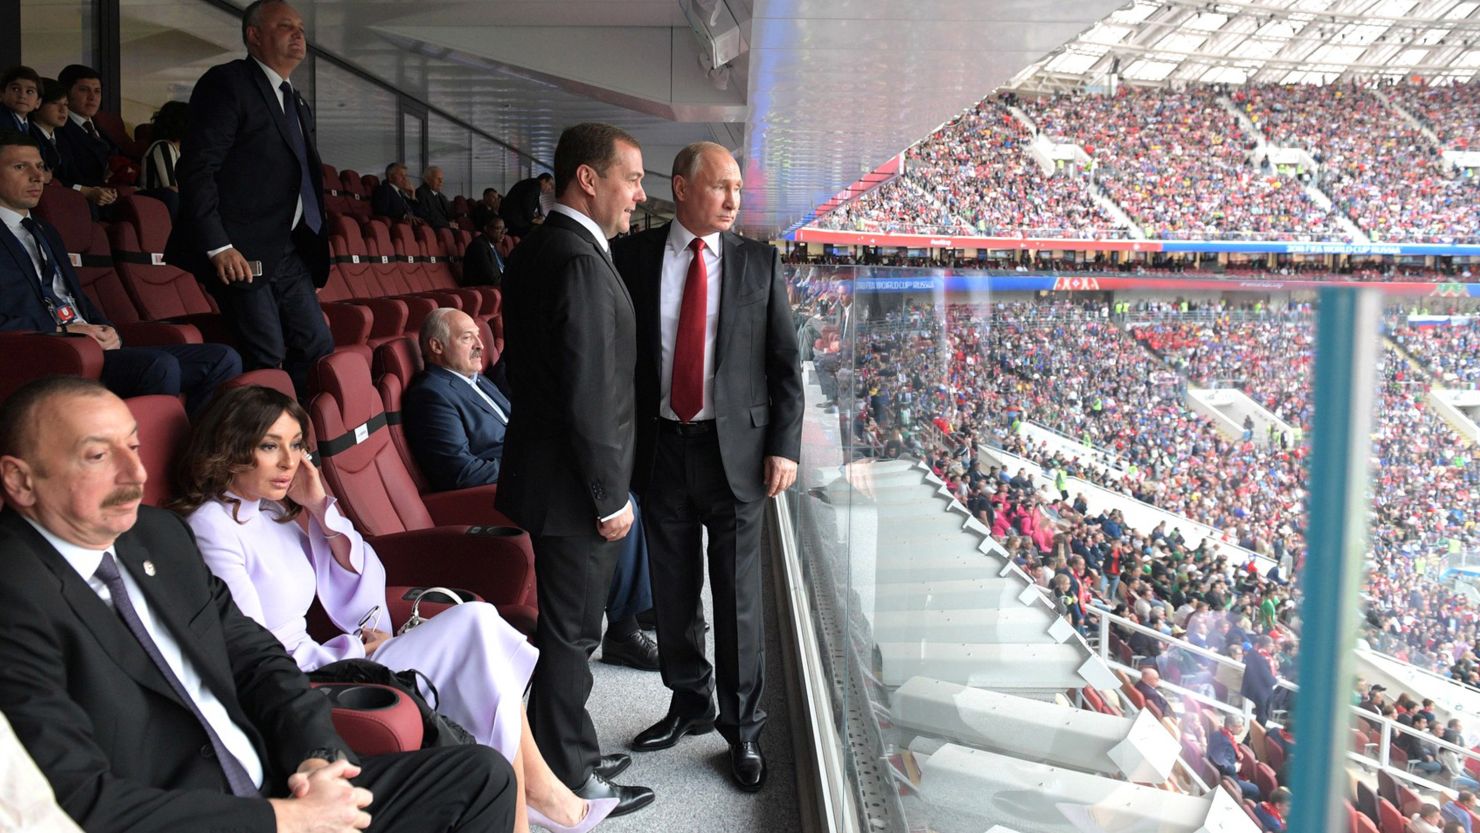 Vladimir Putin and Dmitry Medvedev attend the World Cup opening ceremony on Thursday.  